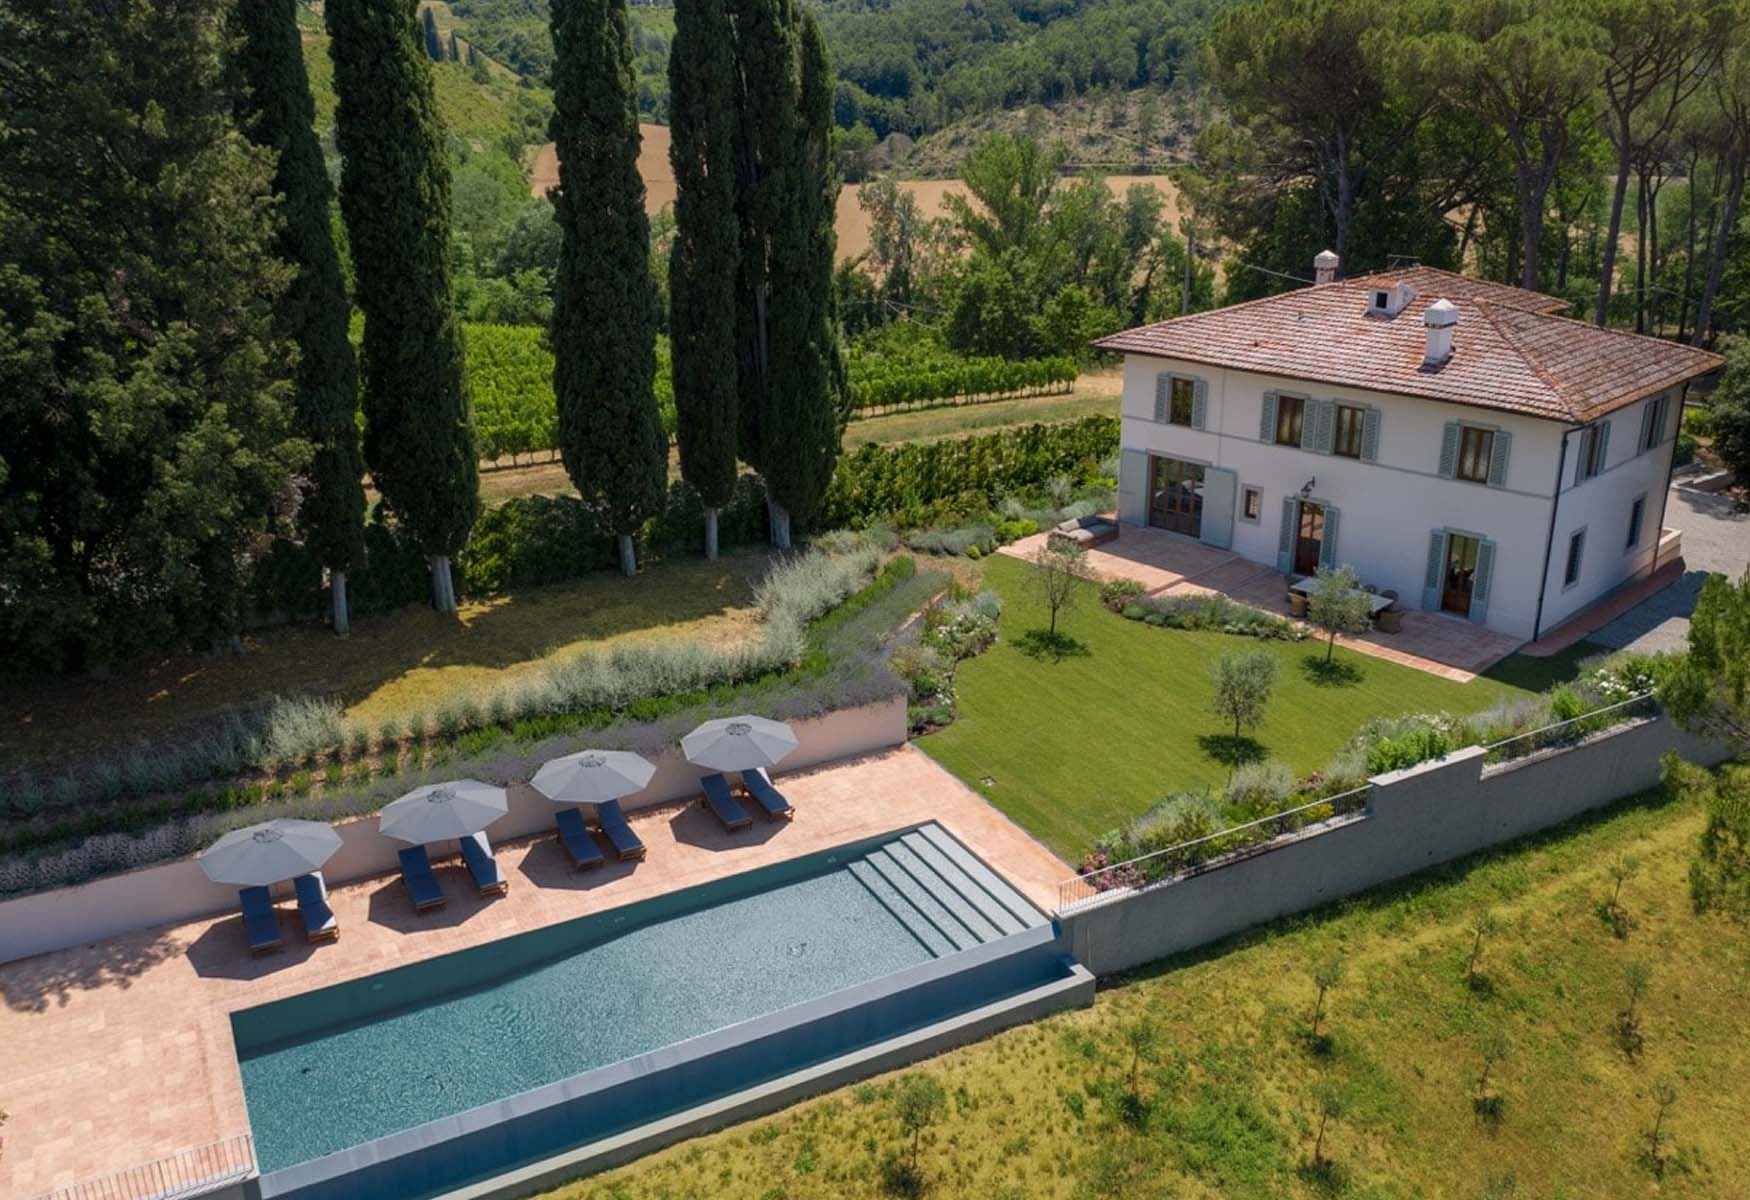 Tuscany Dreams – A Stay In A Tuscan Villa